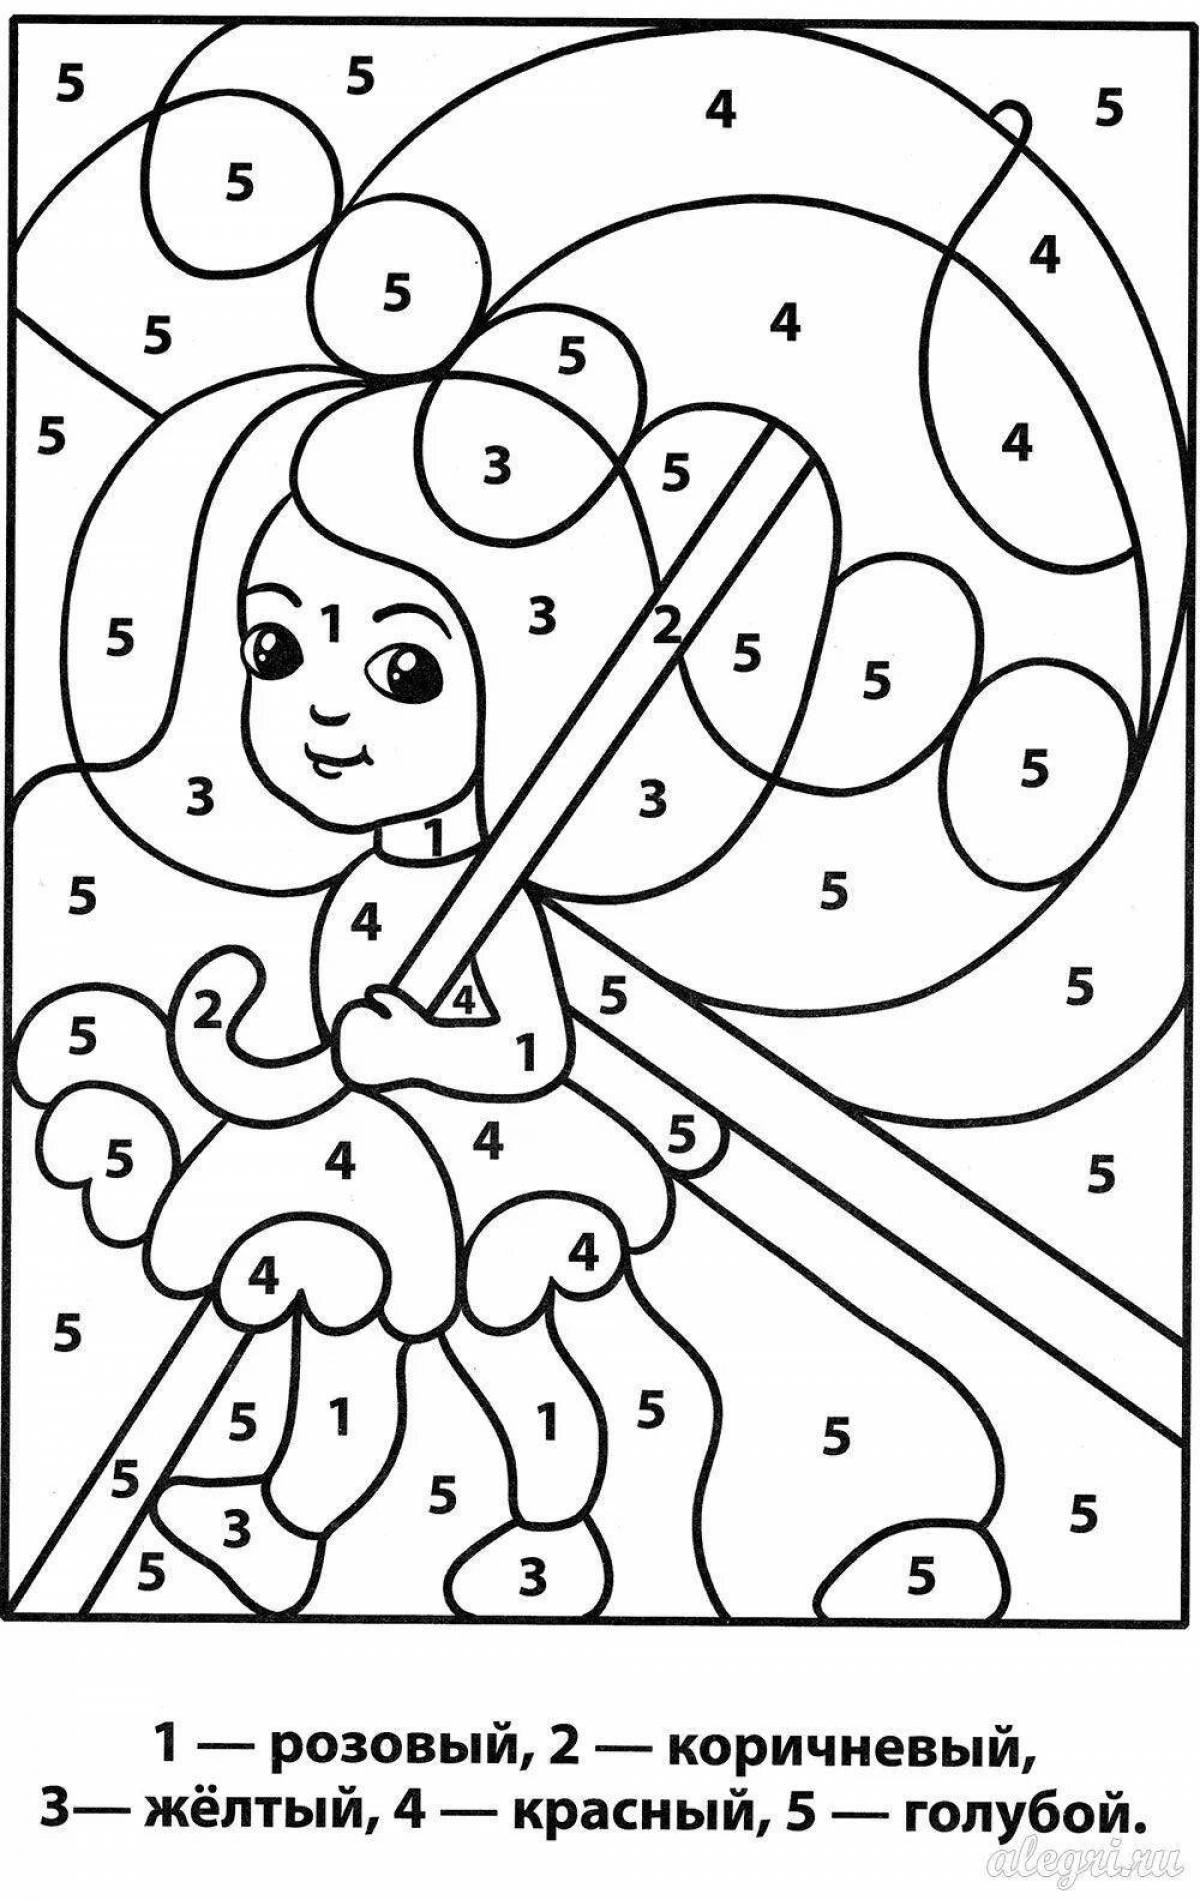 Quirky coloring games for 6 year old girls